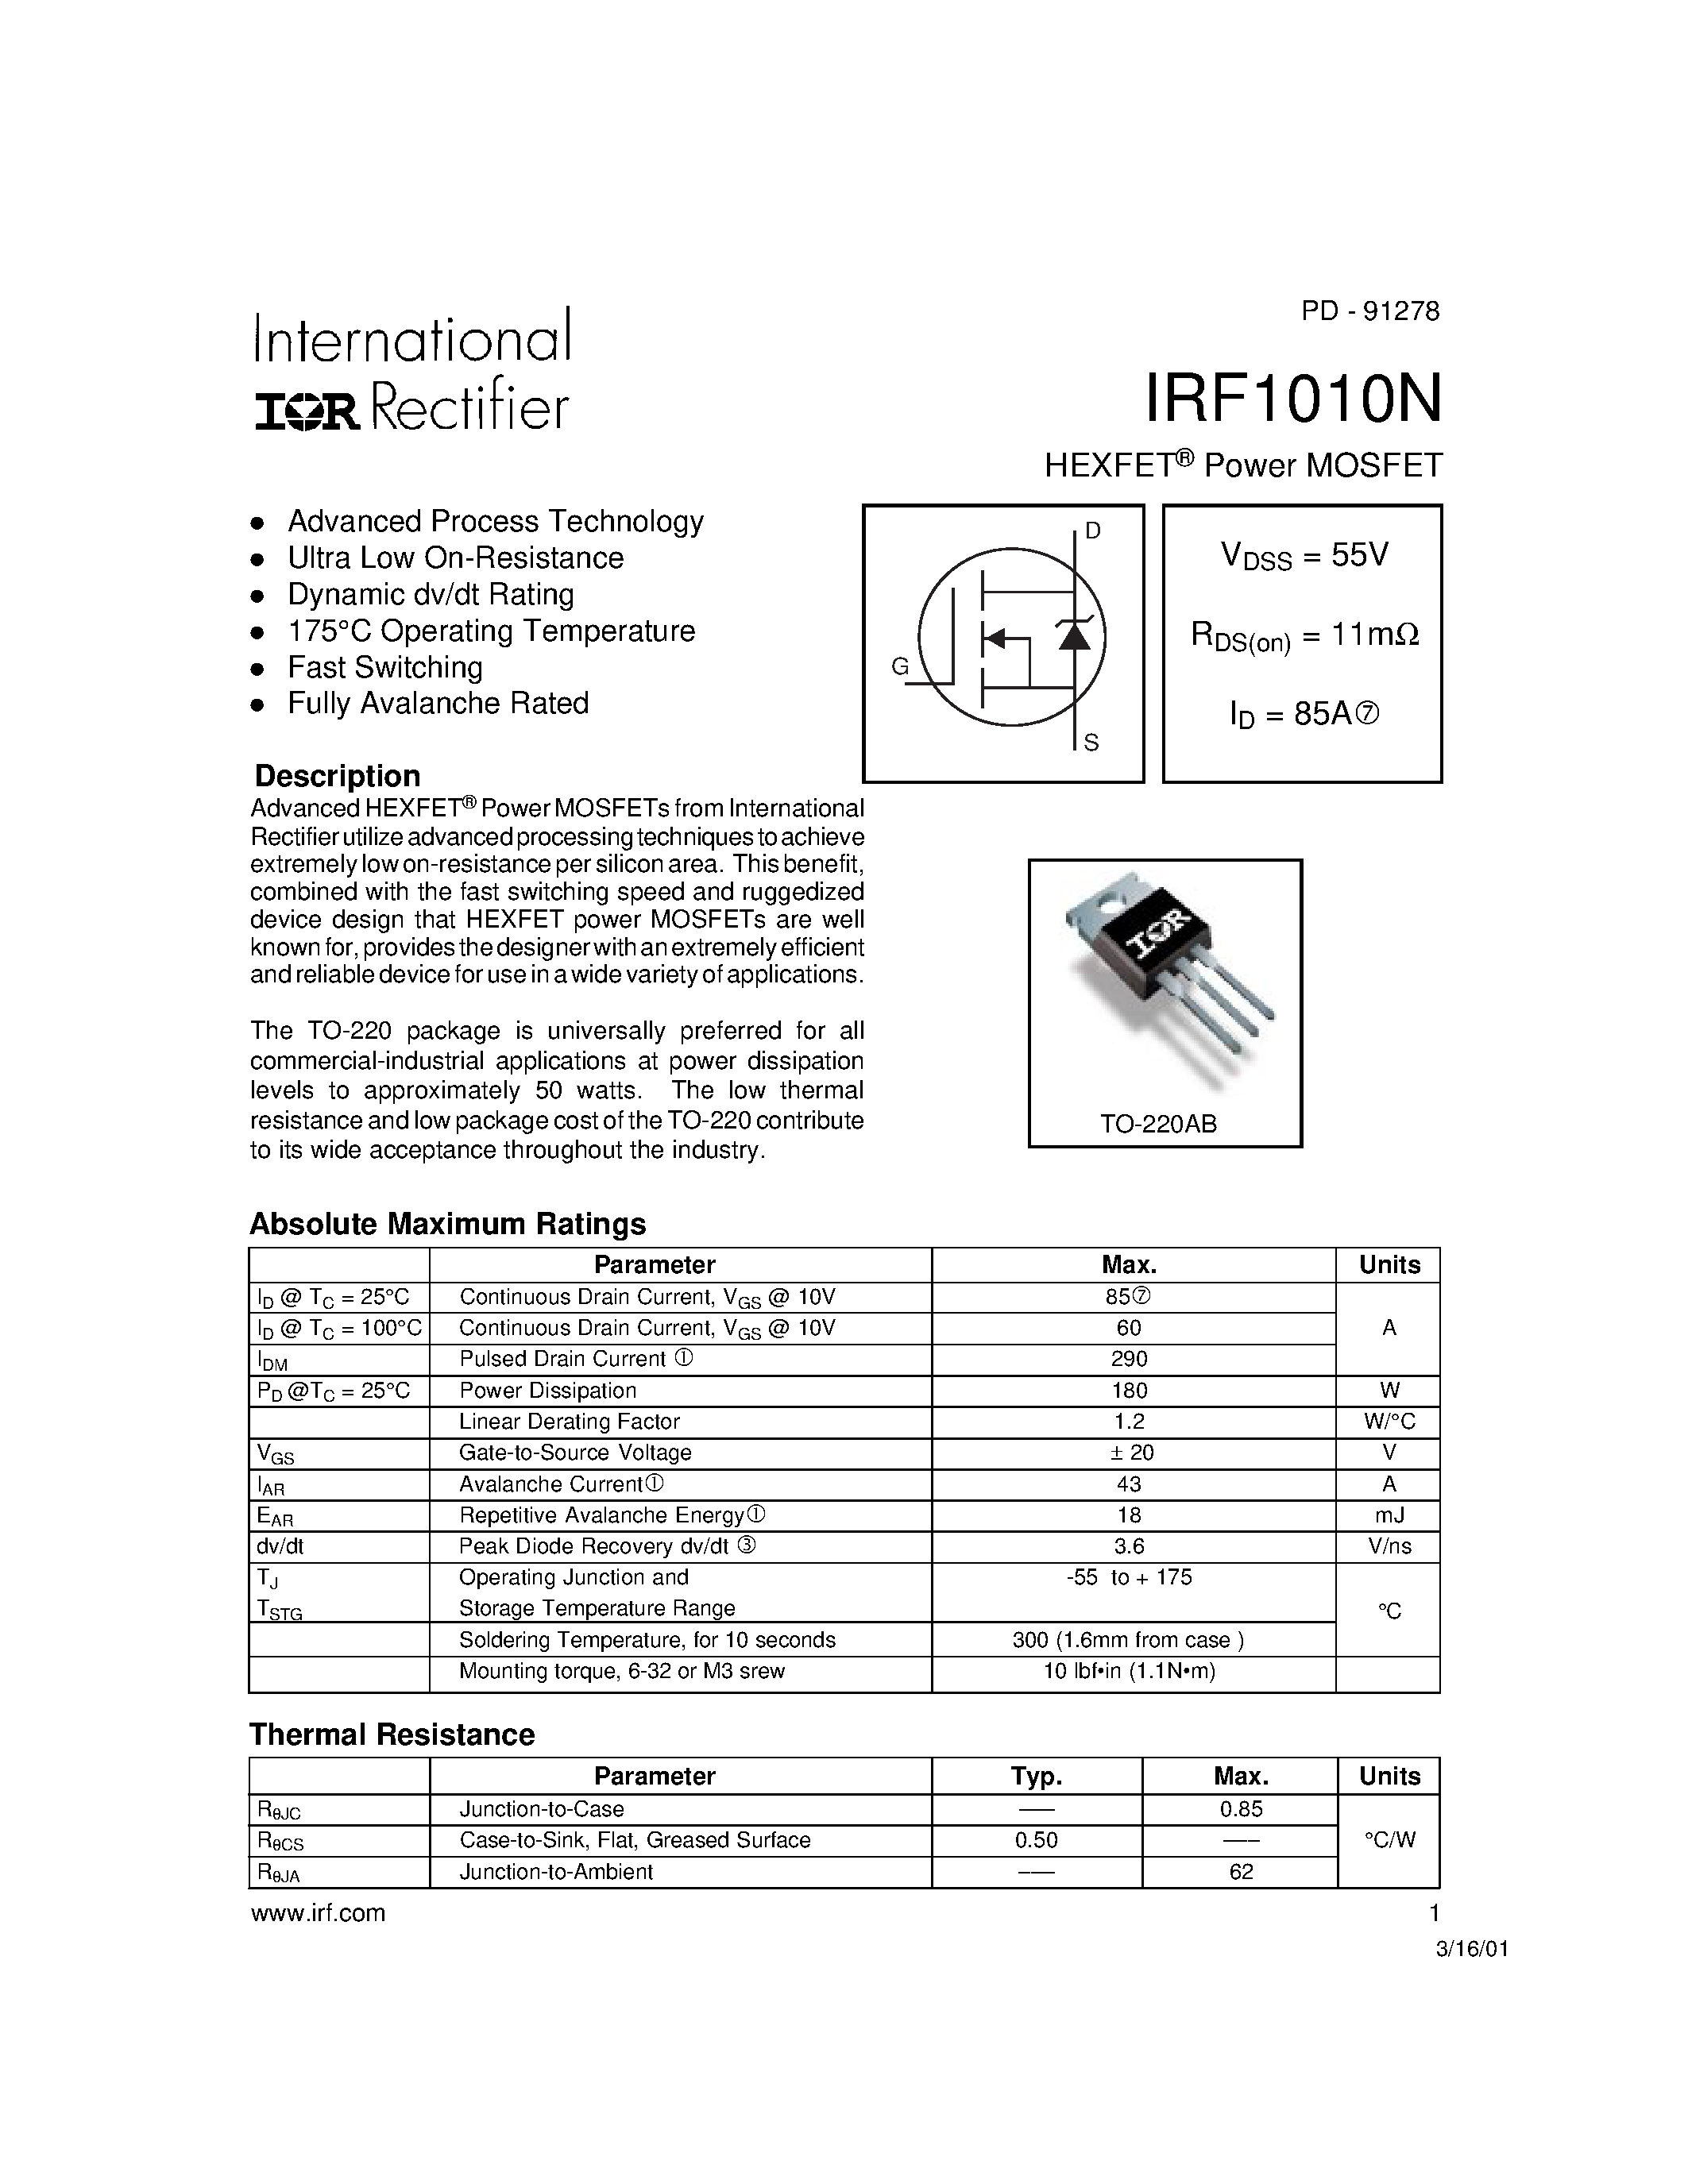 Datasheet IRF1010N - Power MOSFET(Vdss=55V/ Rds(on)=11mohm/ Id=85A) page 1